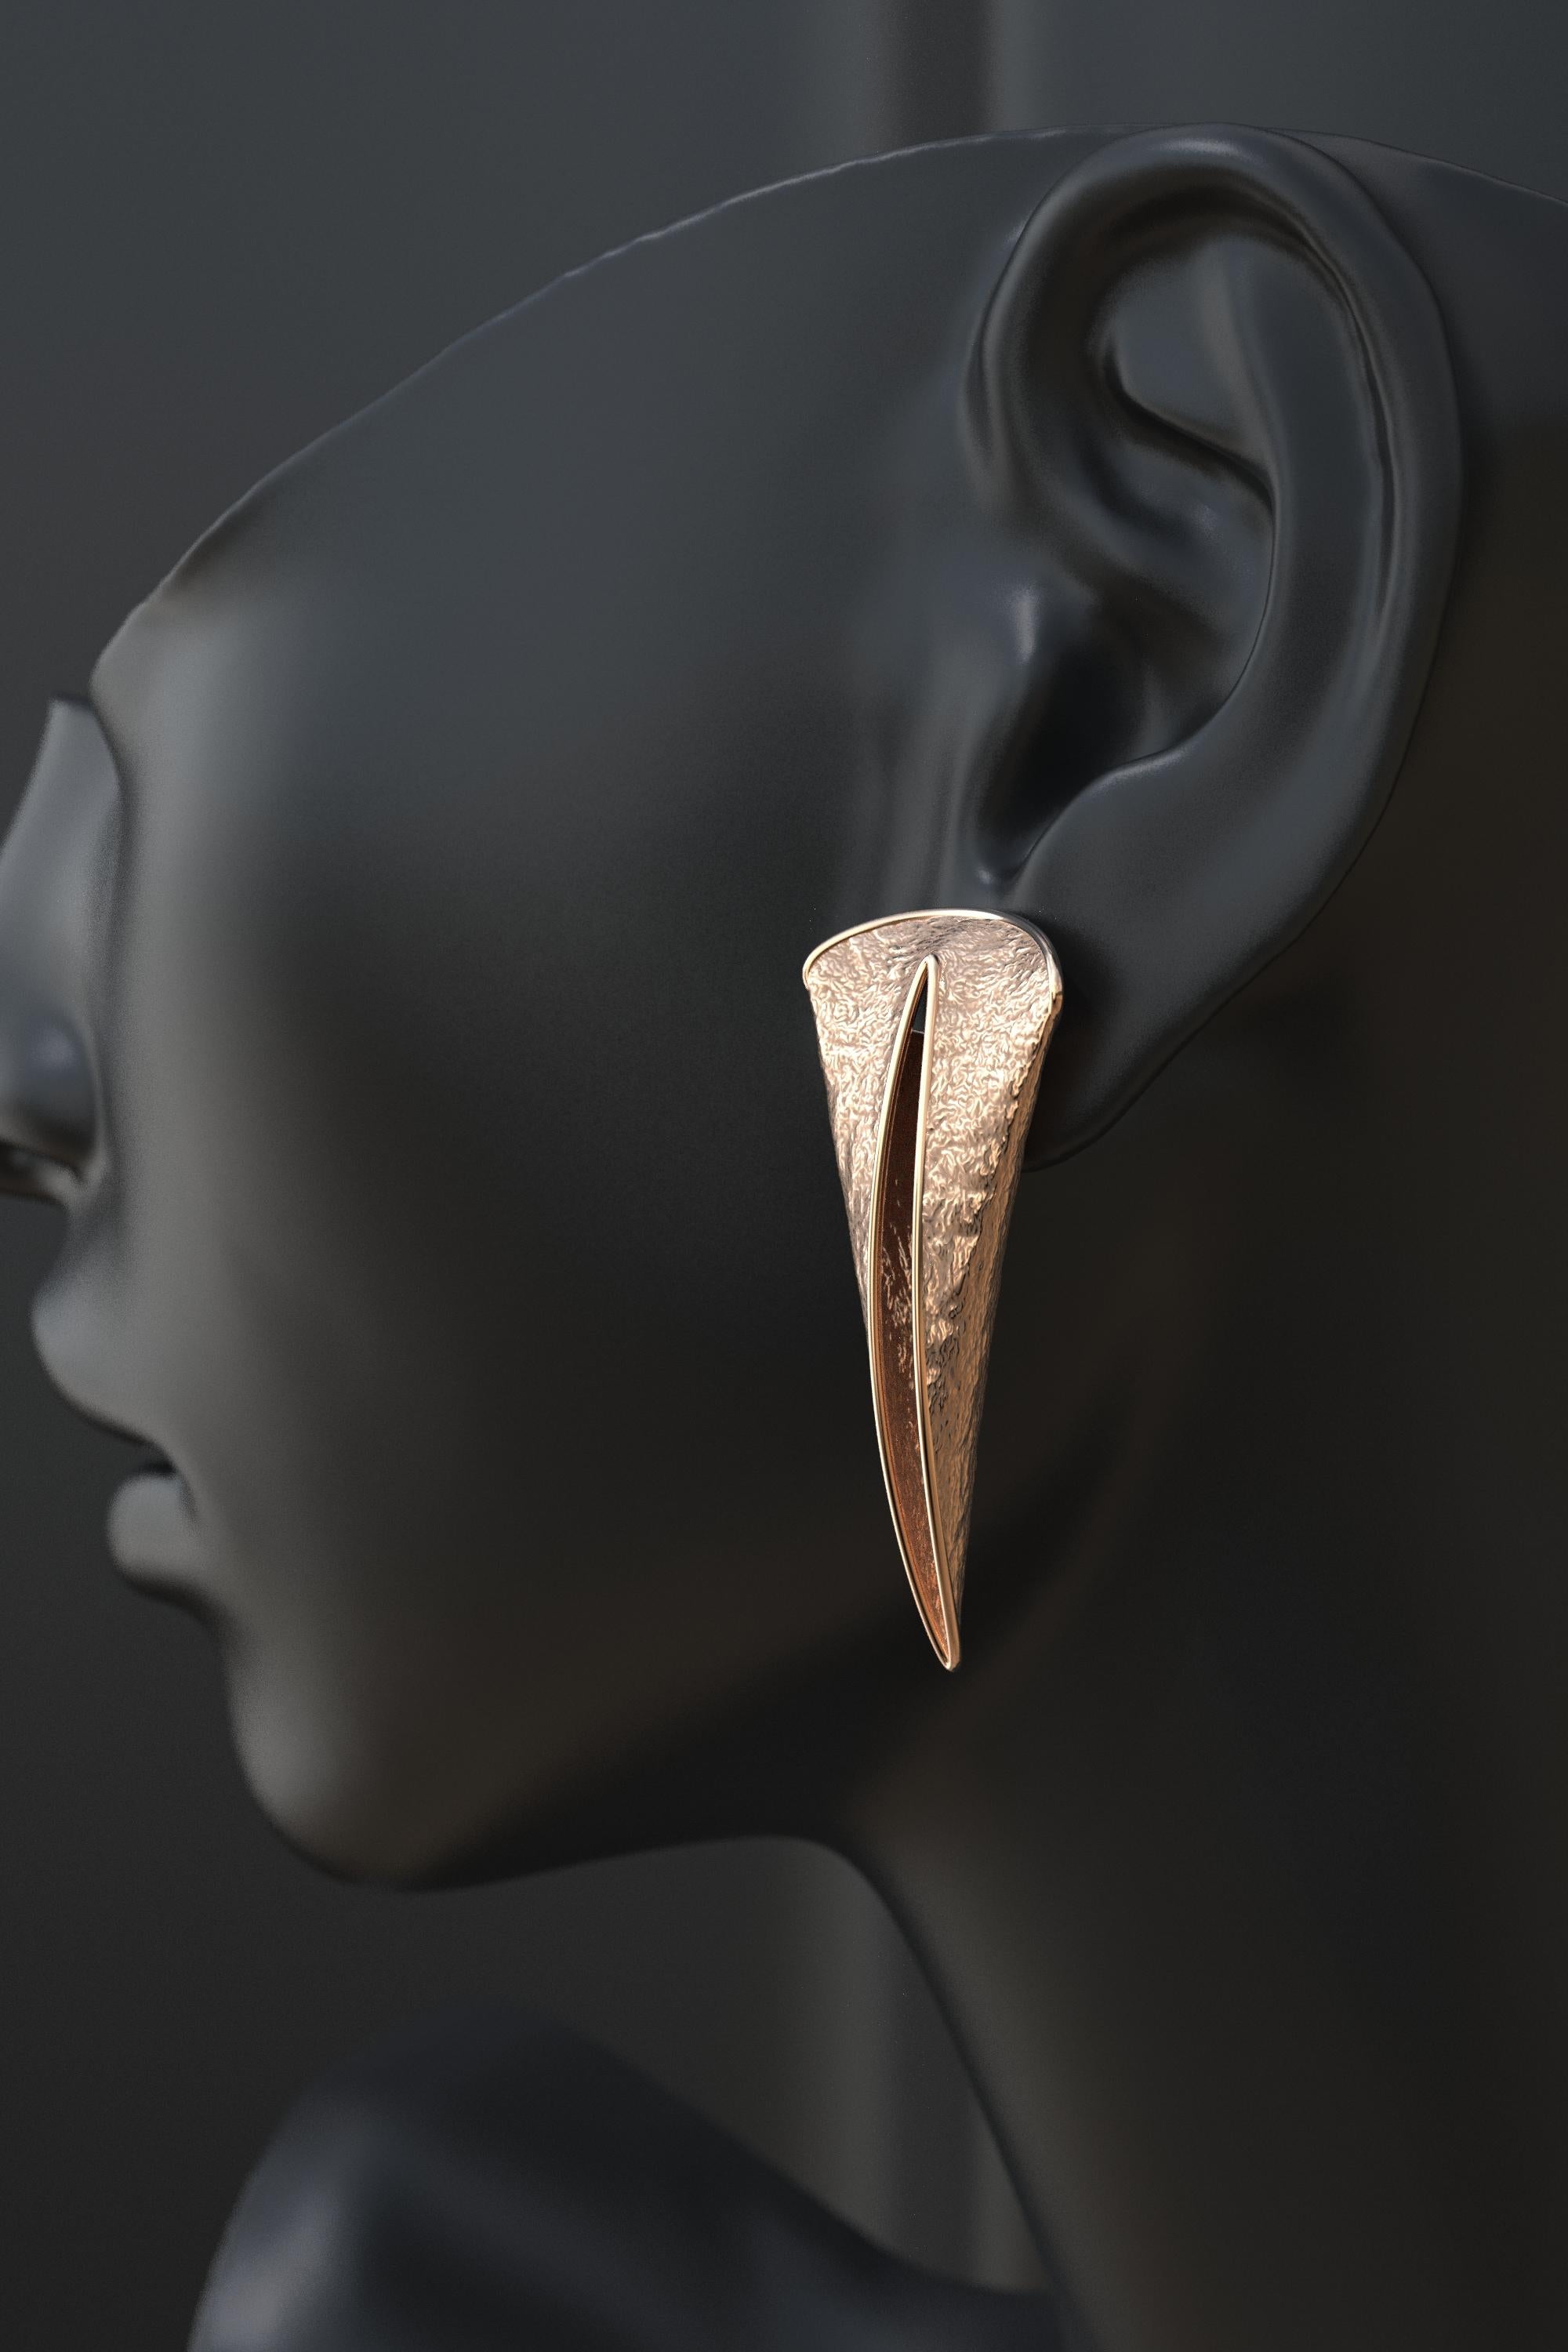 Bold 14k Gold Earrings Handmade in Italy by Oltremare Gioielli, Thorn Shaped. For Sale 2